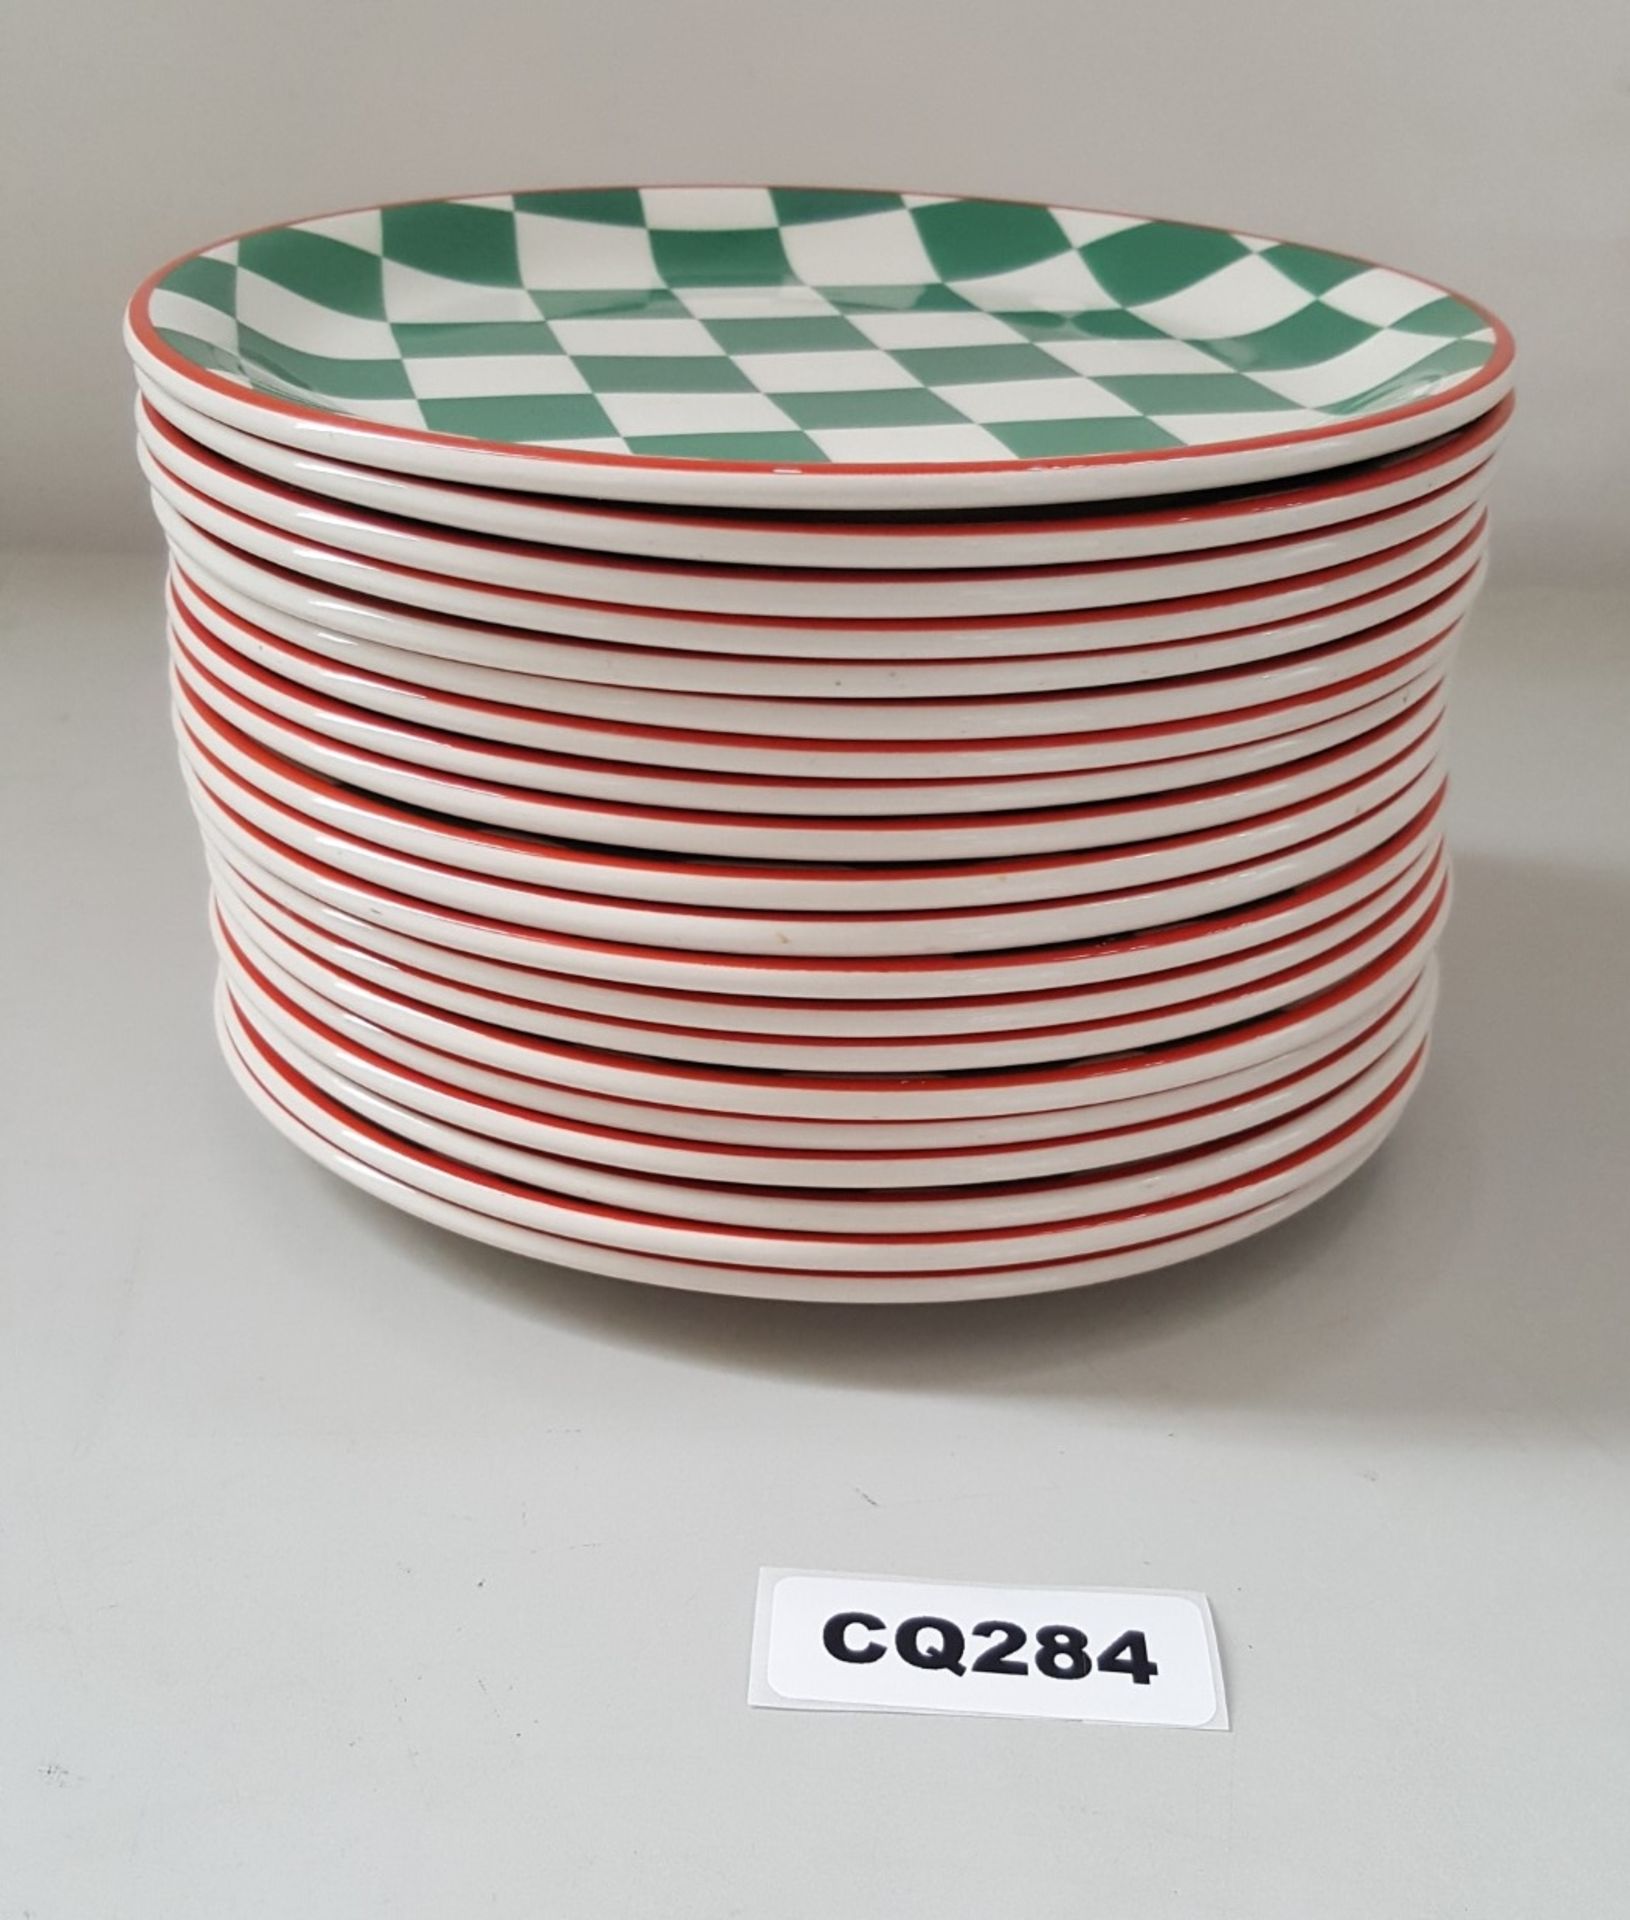 20 x Steelite Plates Checkered Green&White With Red Outline 20CM - Ref CQ284 - Image 2 of 4